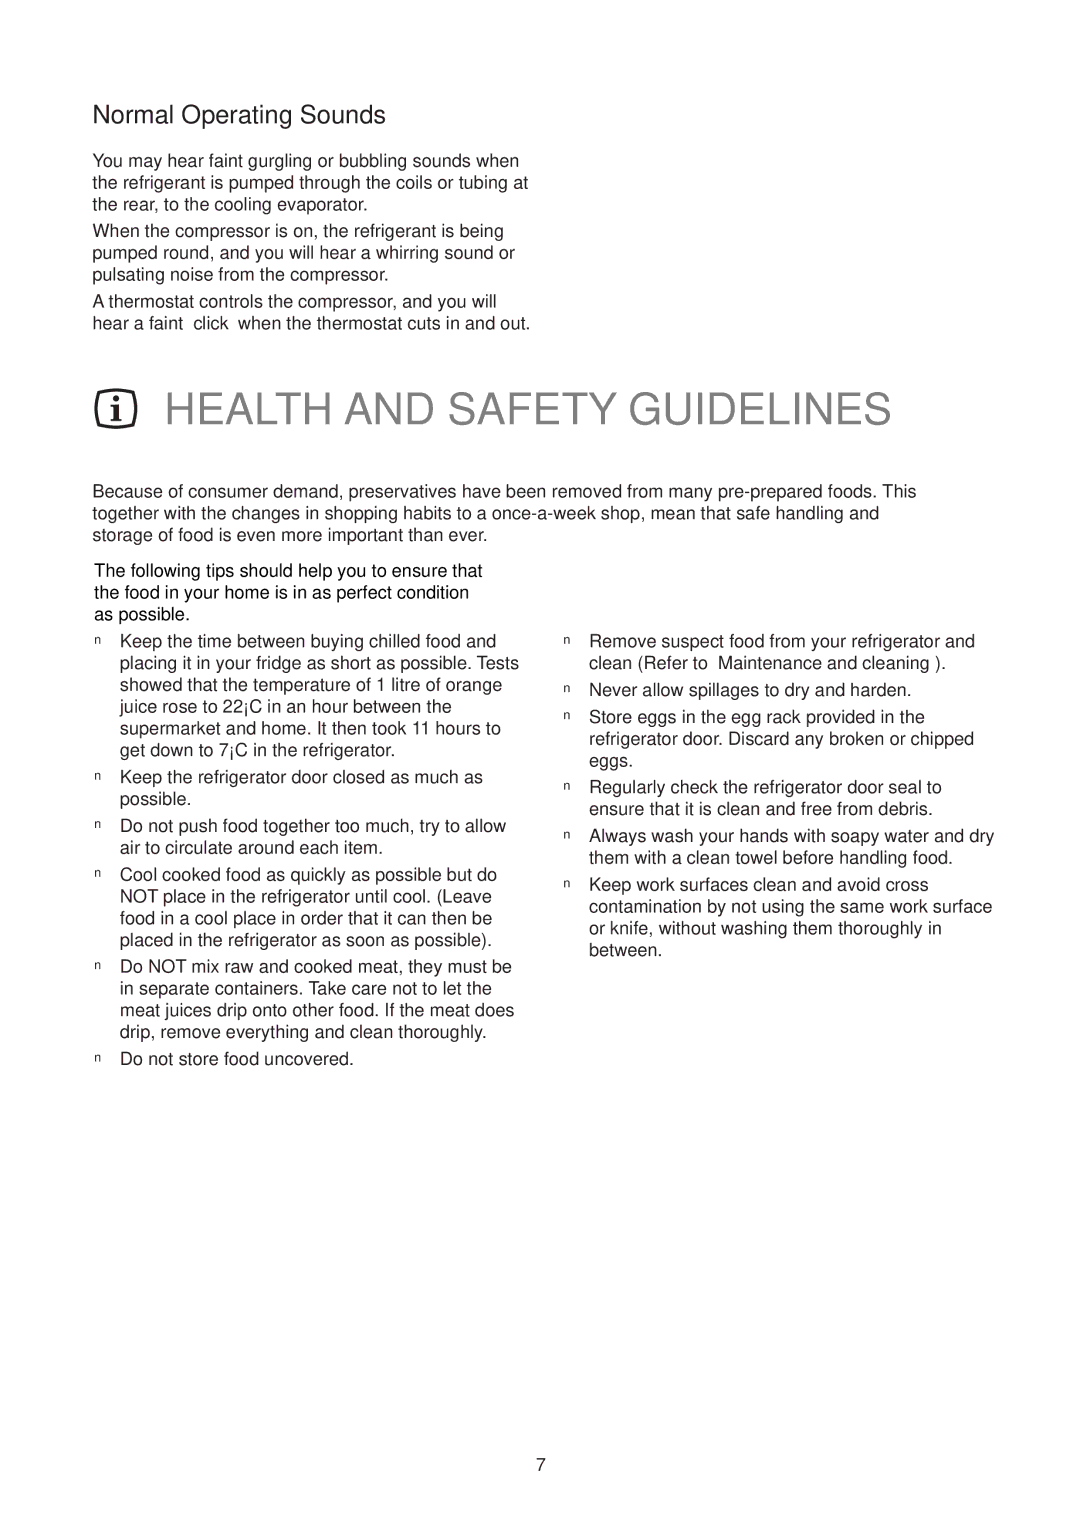 Electrolux ER 1627T manual Health and Safety Guidelines, Normal Operating Sounds 